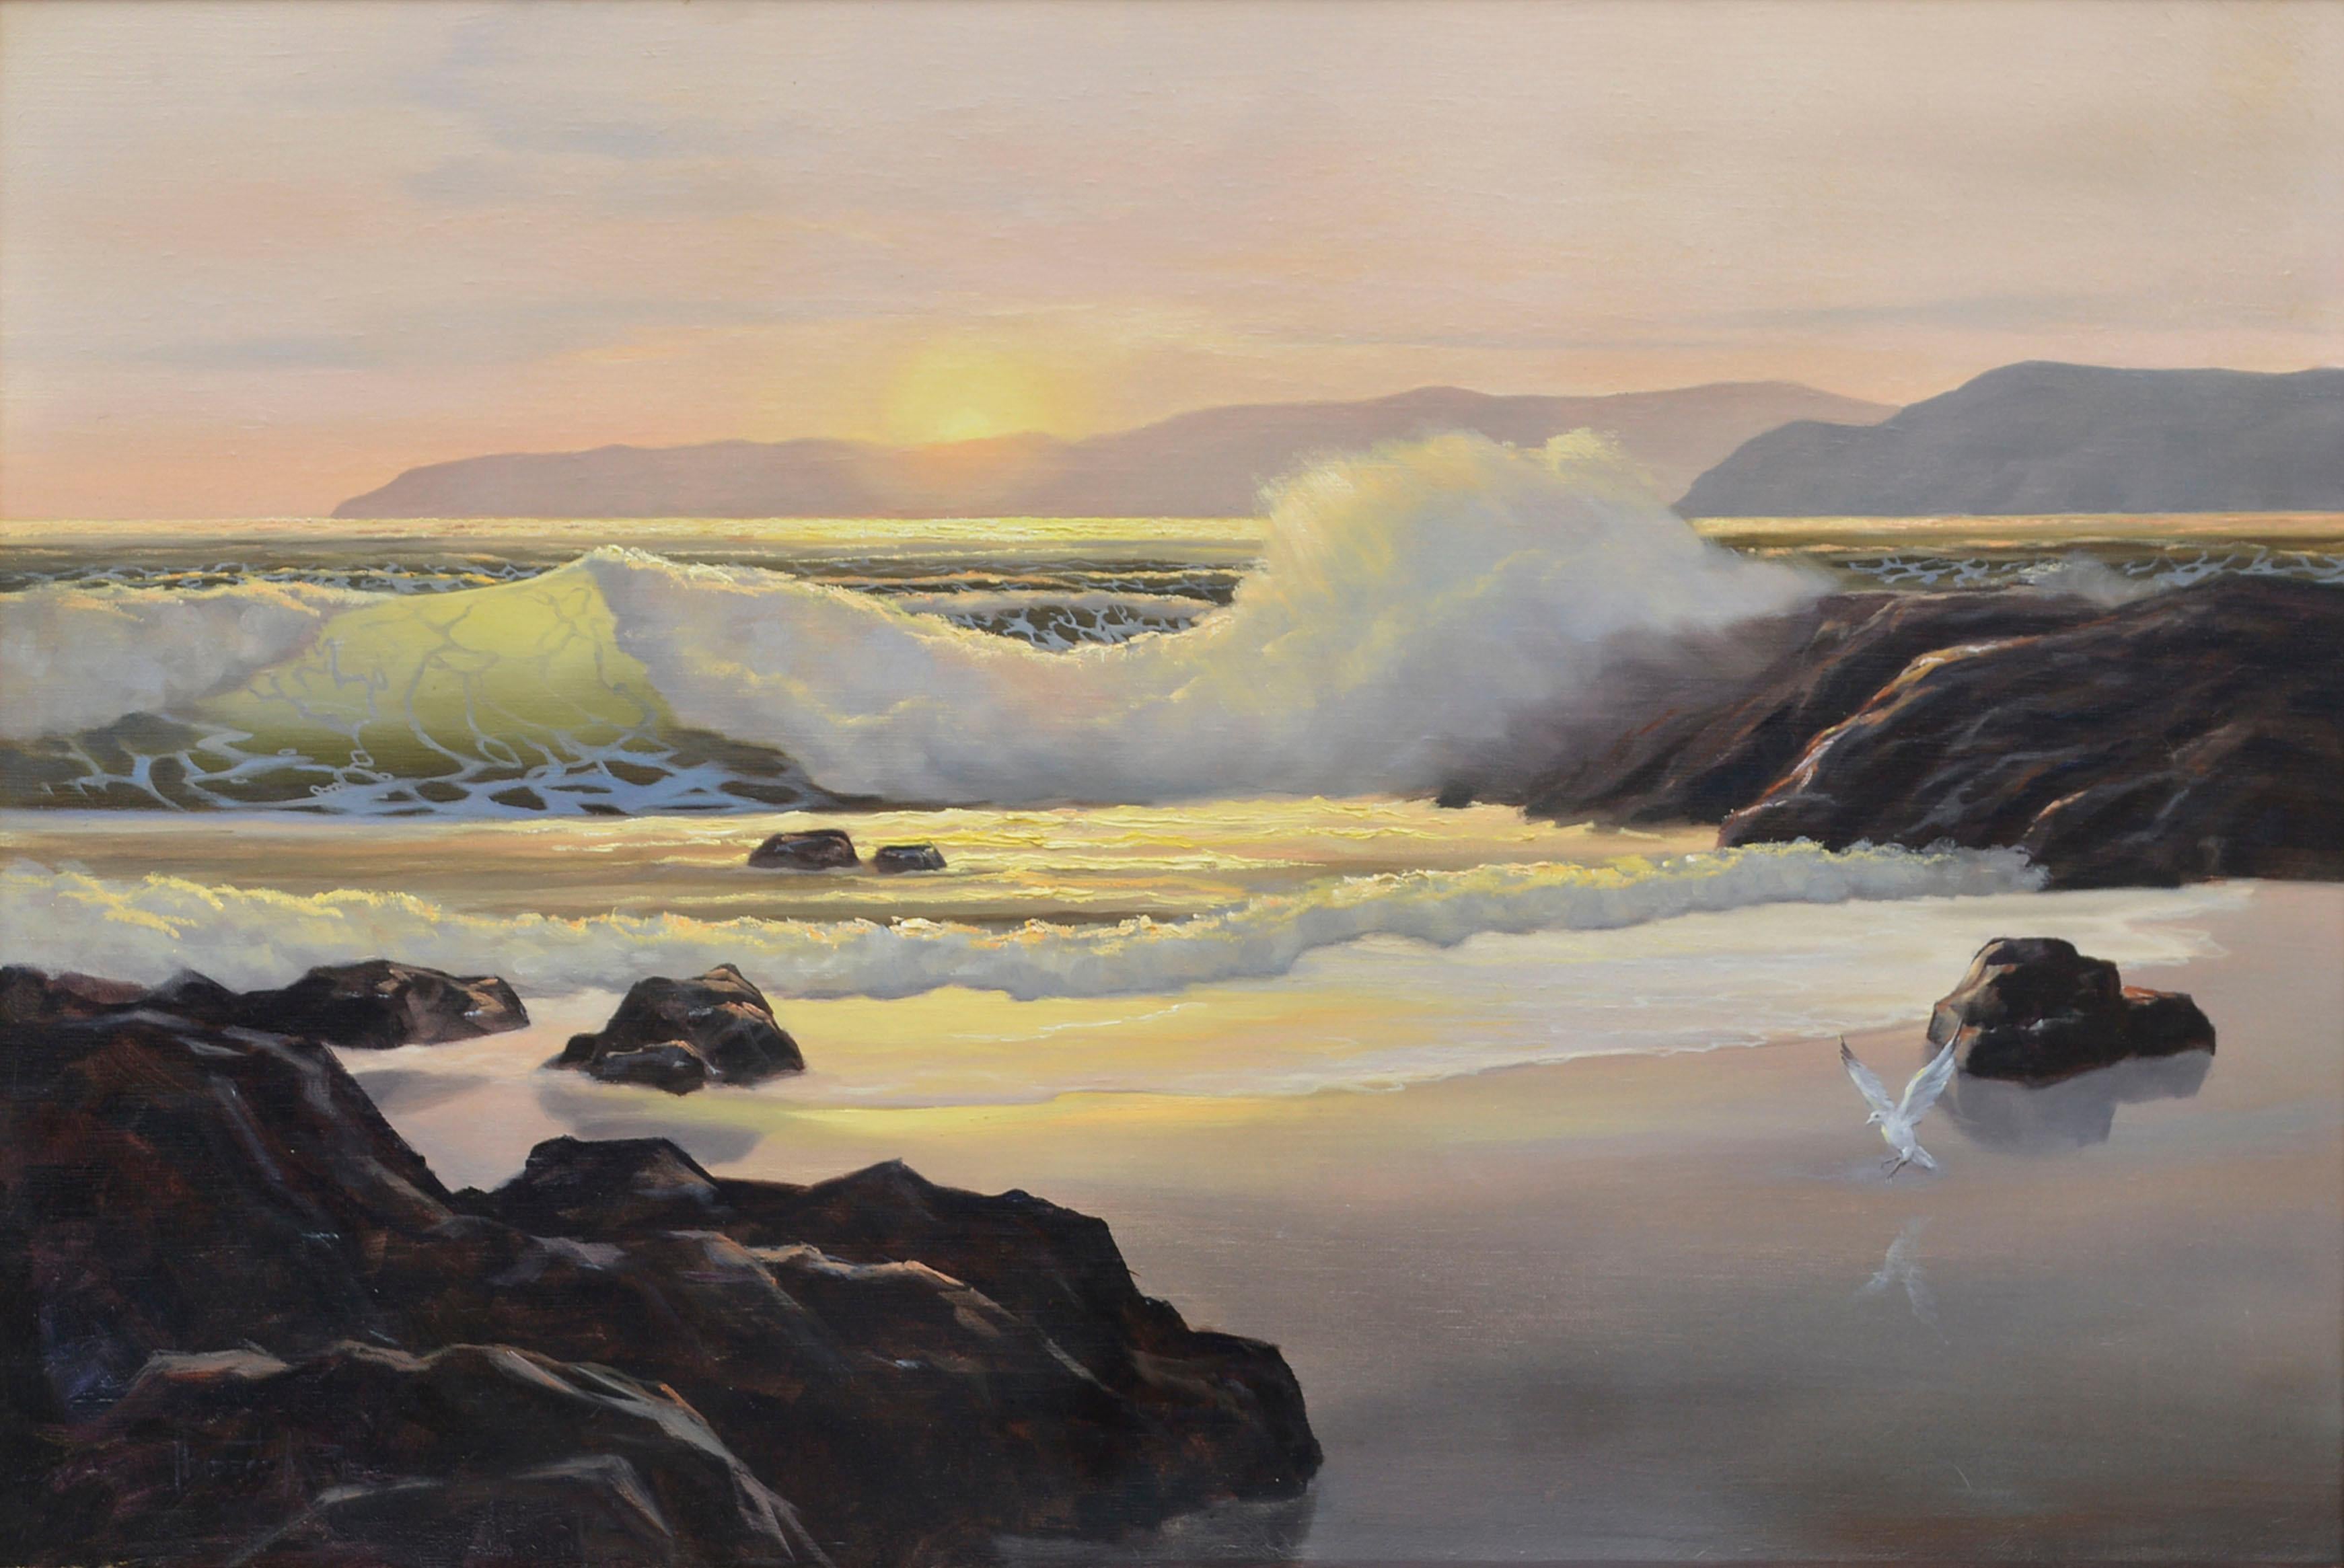 California Seascape at Sunset - Painting by Norberto A. Reyes